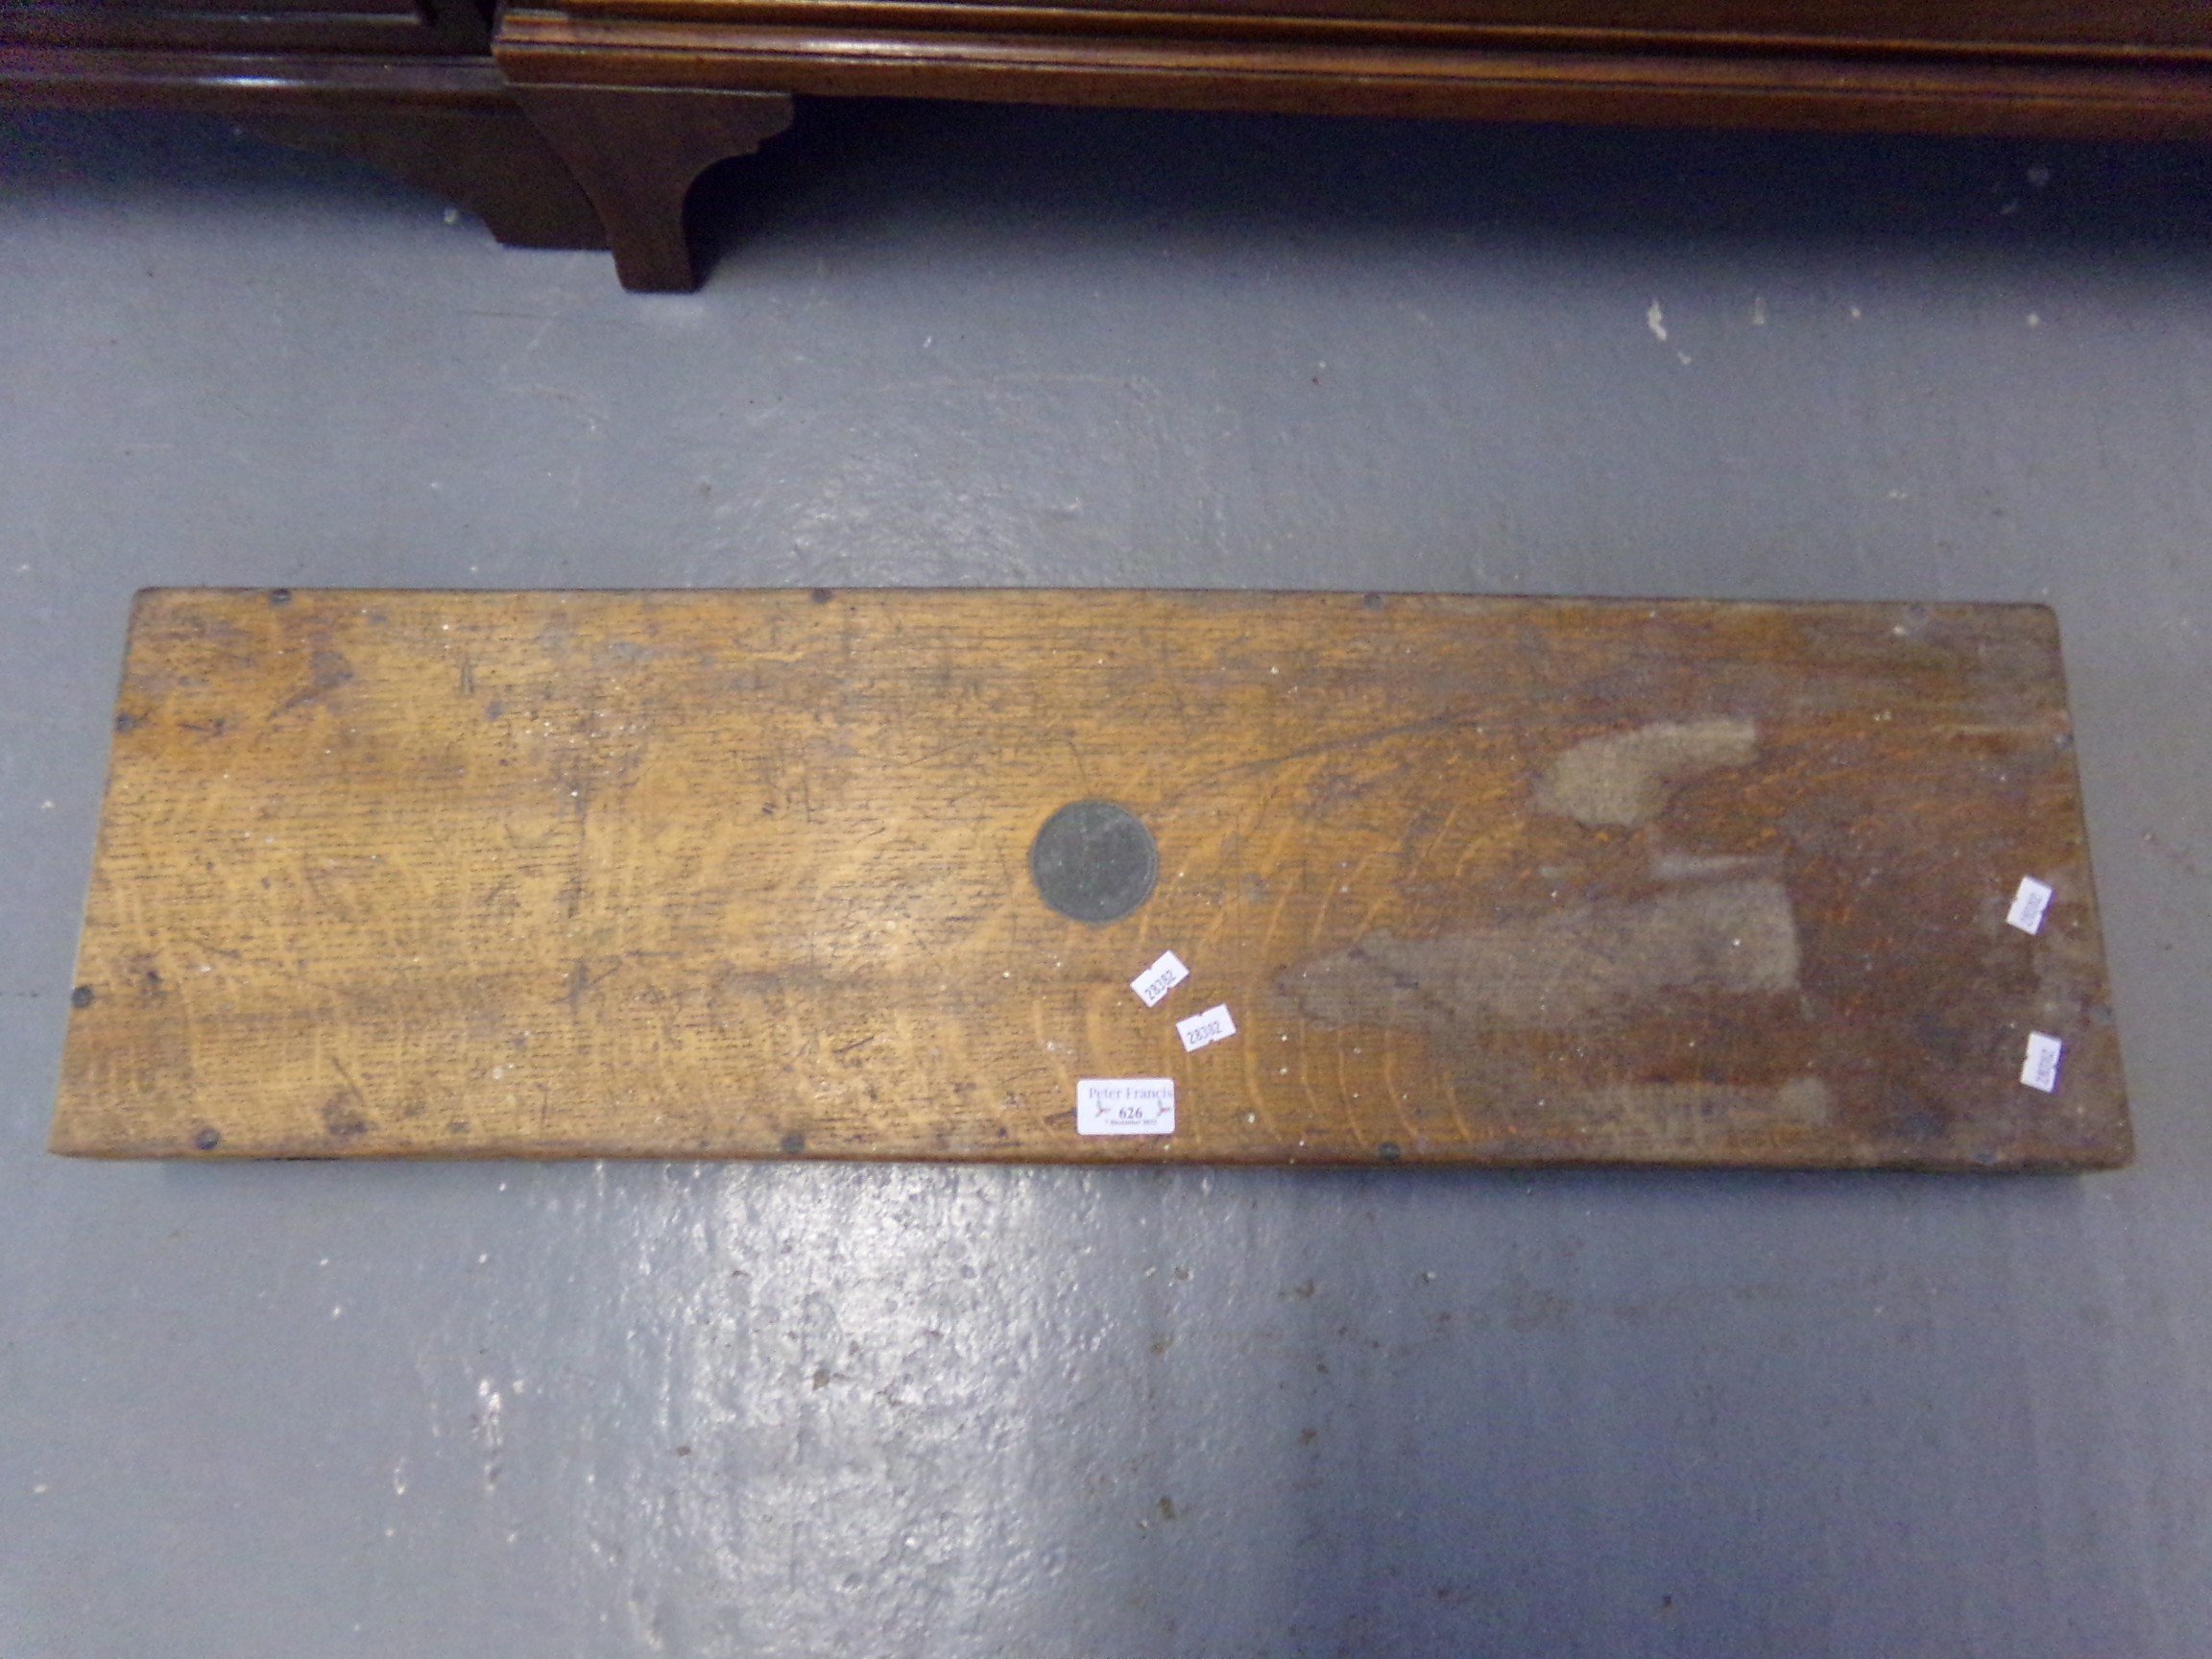 19th century oak cased 'Oak Gun Motoring' case with label for 'Balisher & Terry' with exemption - Image 3 of 5